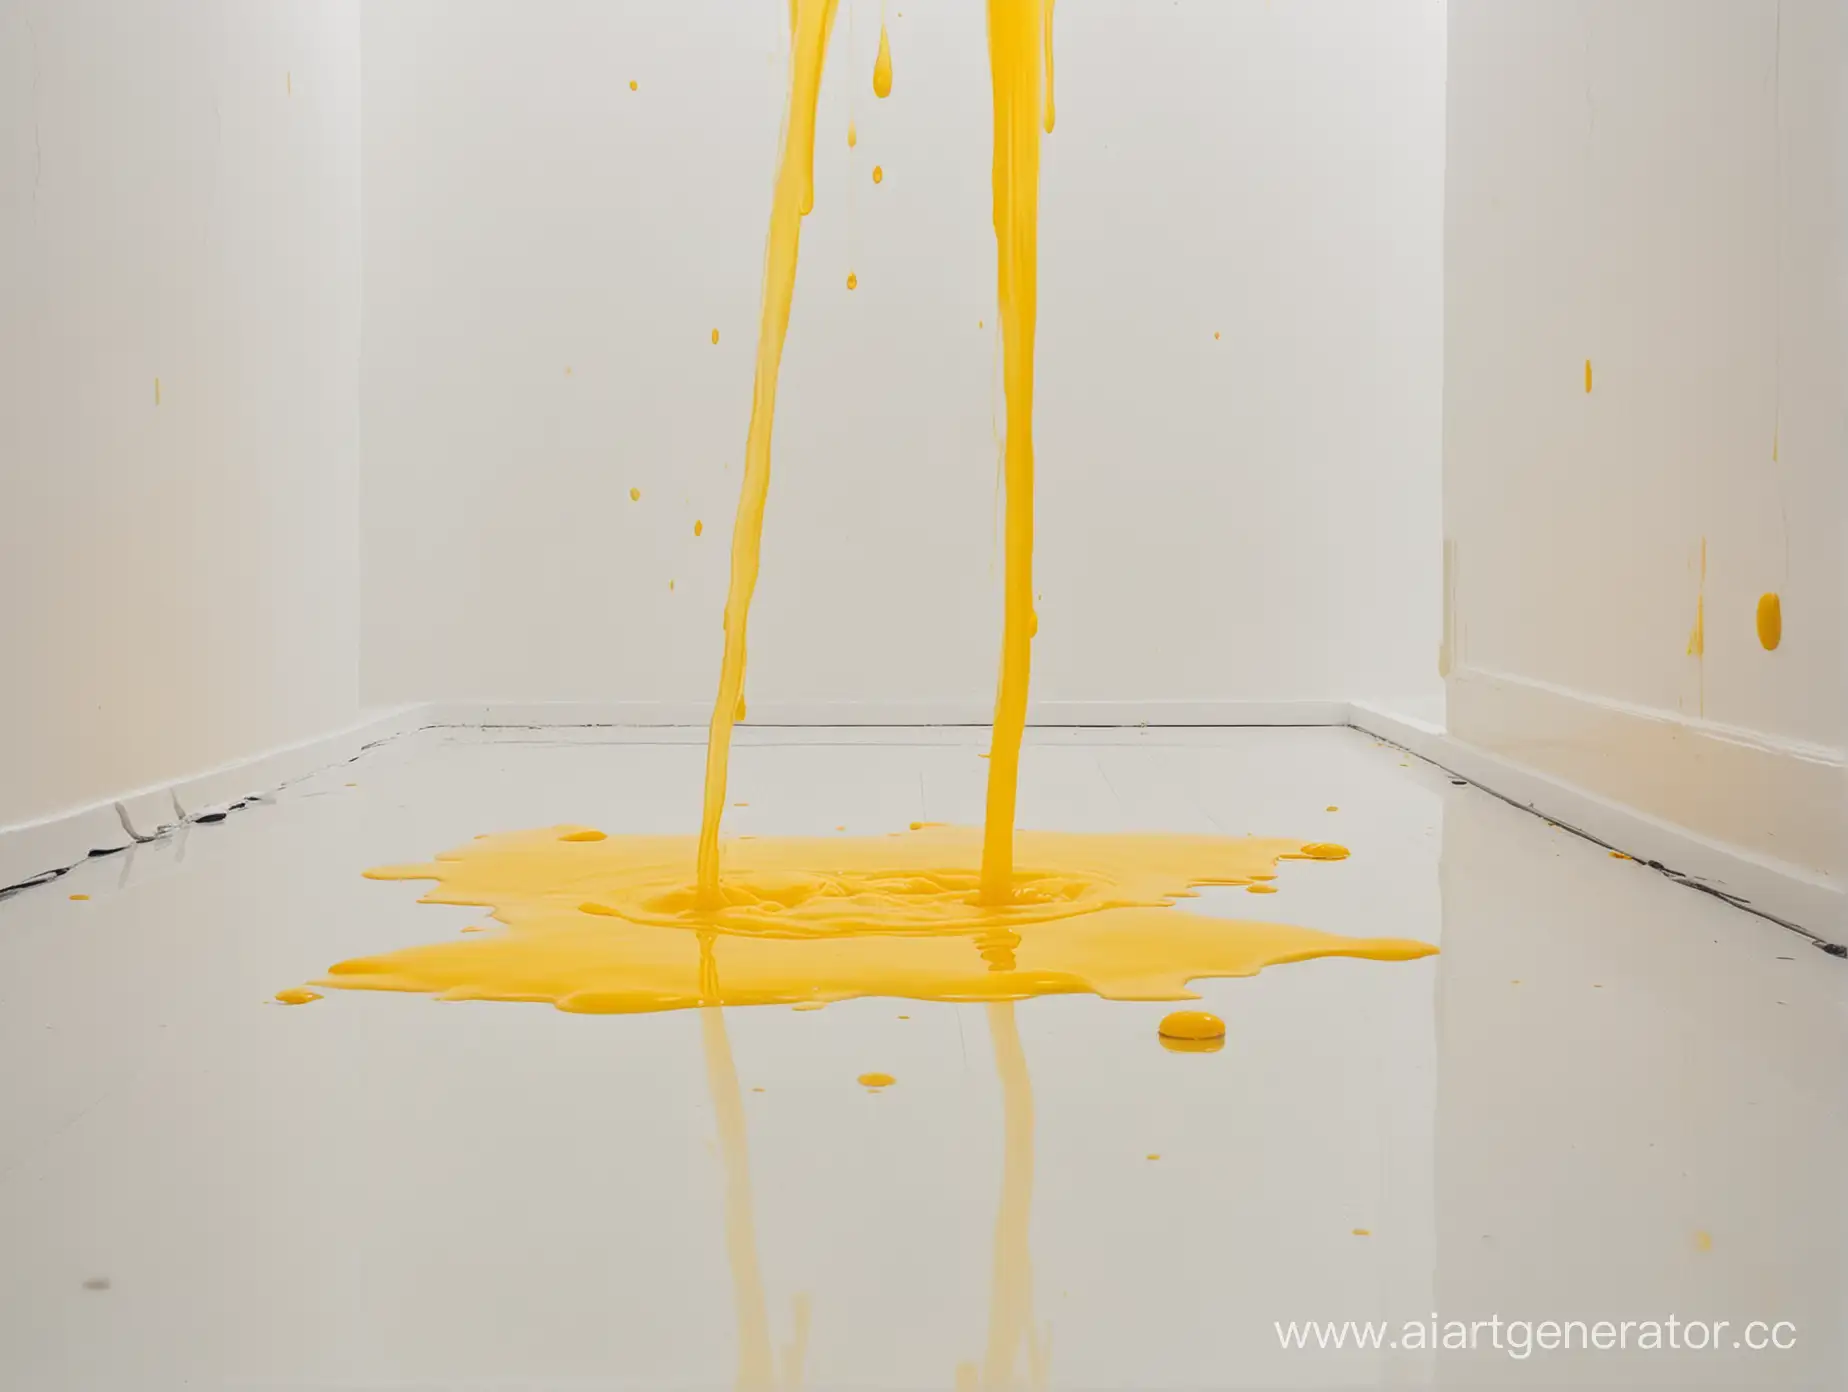 Vibrant-Yellow-Liquid-Cascading-in-White-Space